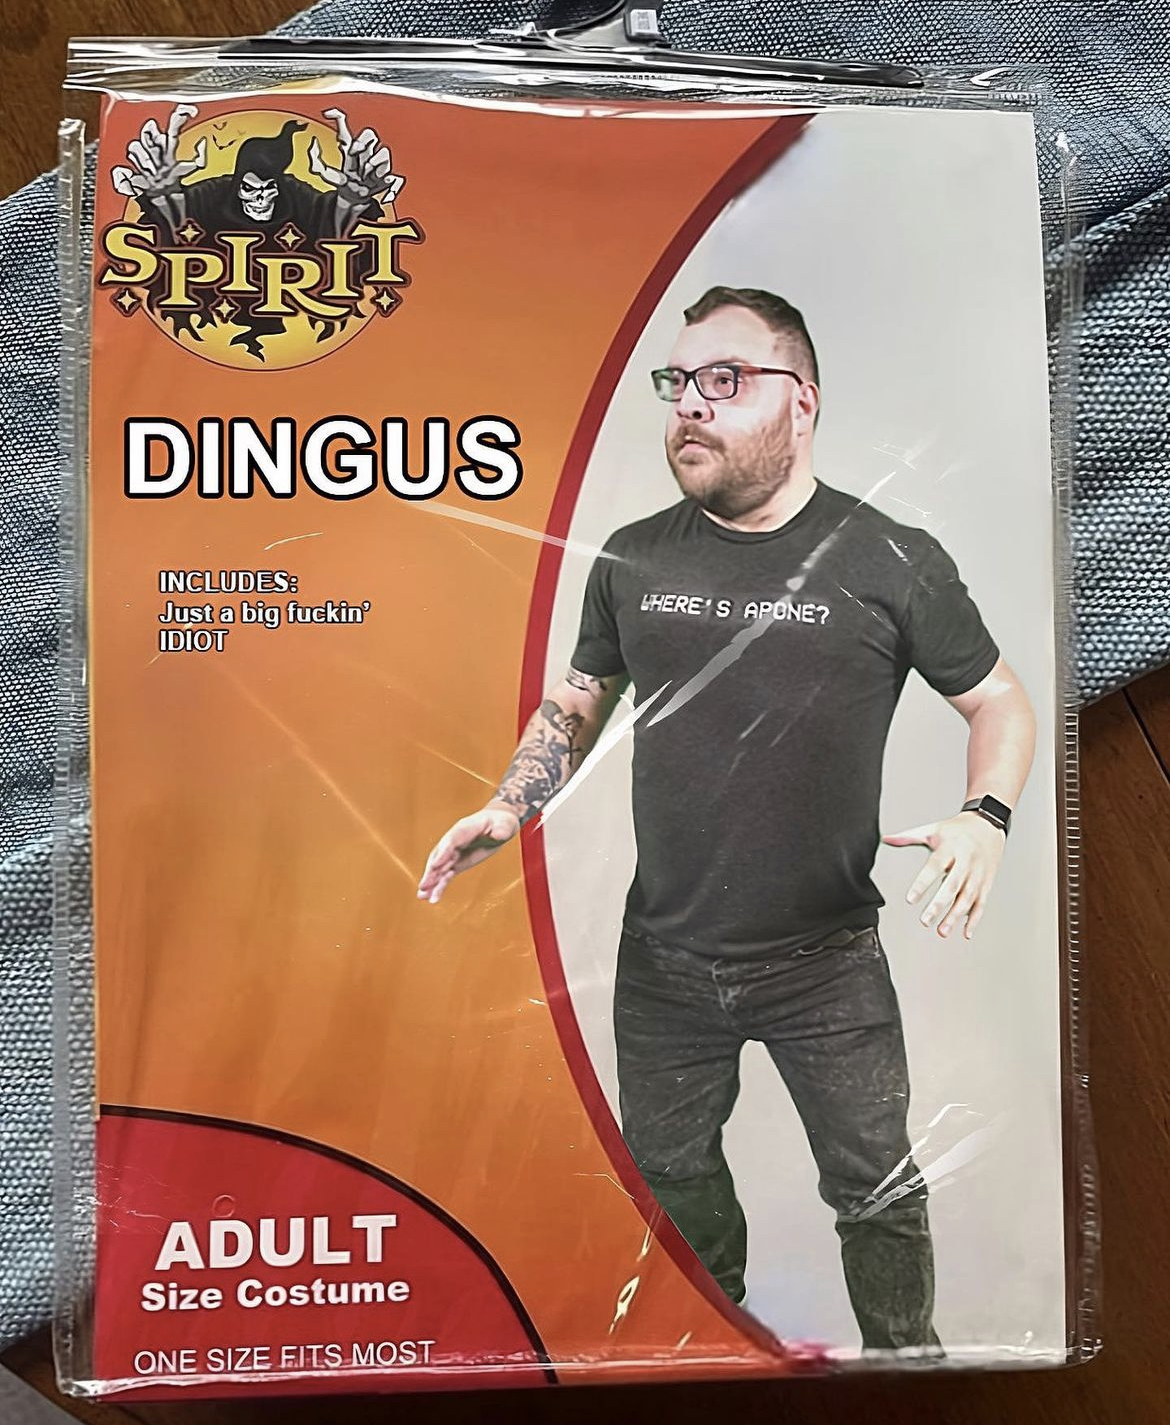 Costume Memes - spirit halloween - Spirit Dingus Includes Just a big fuckin' Idiot Adult Size Costume One Size Fits Most Where'S Apene?